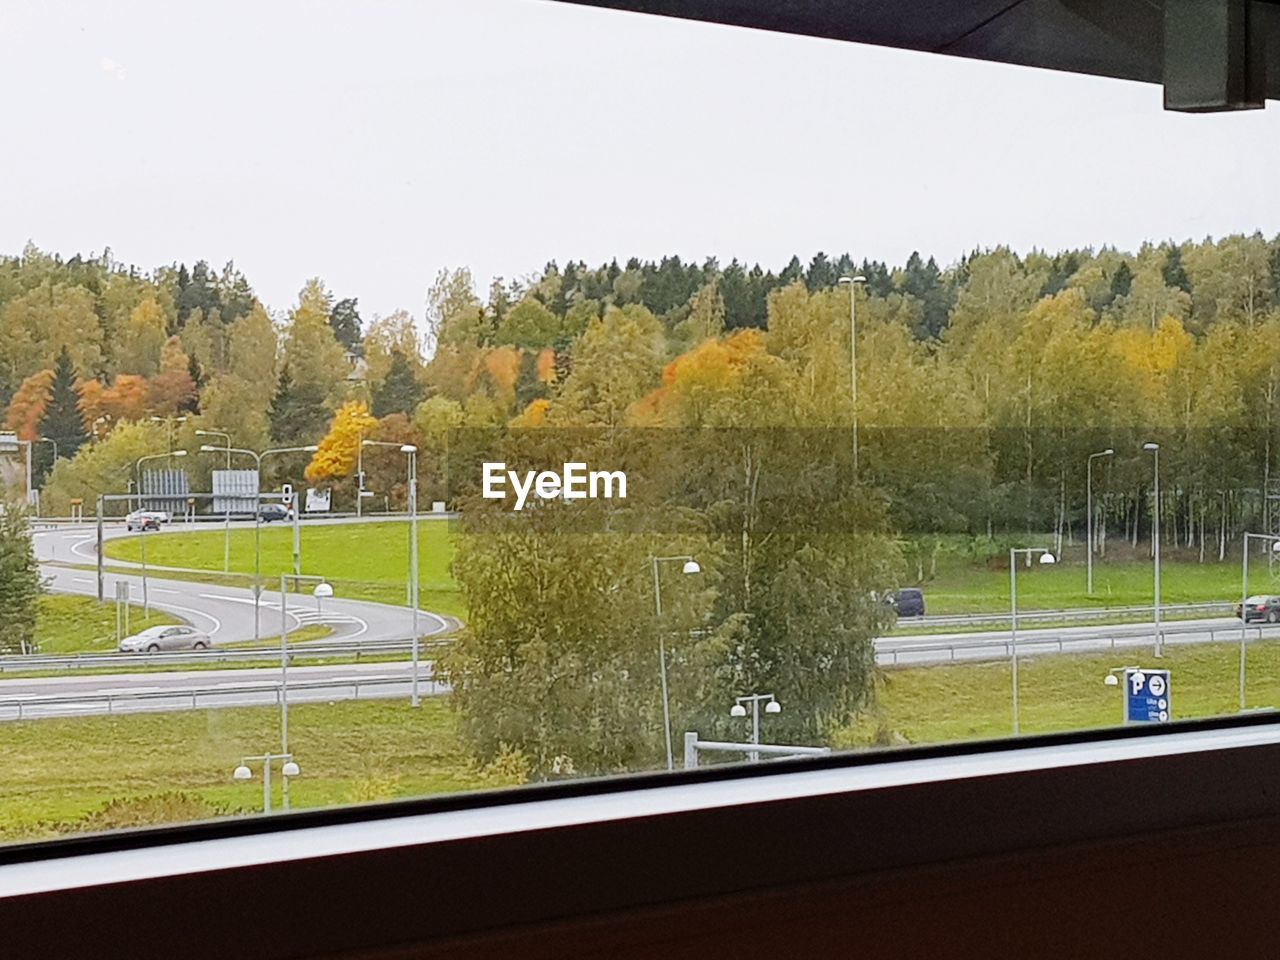 TREES AND PLANTS ON FIELD SEEN THROUGH WINDOW